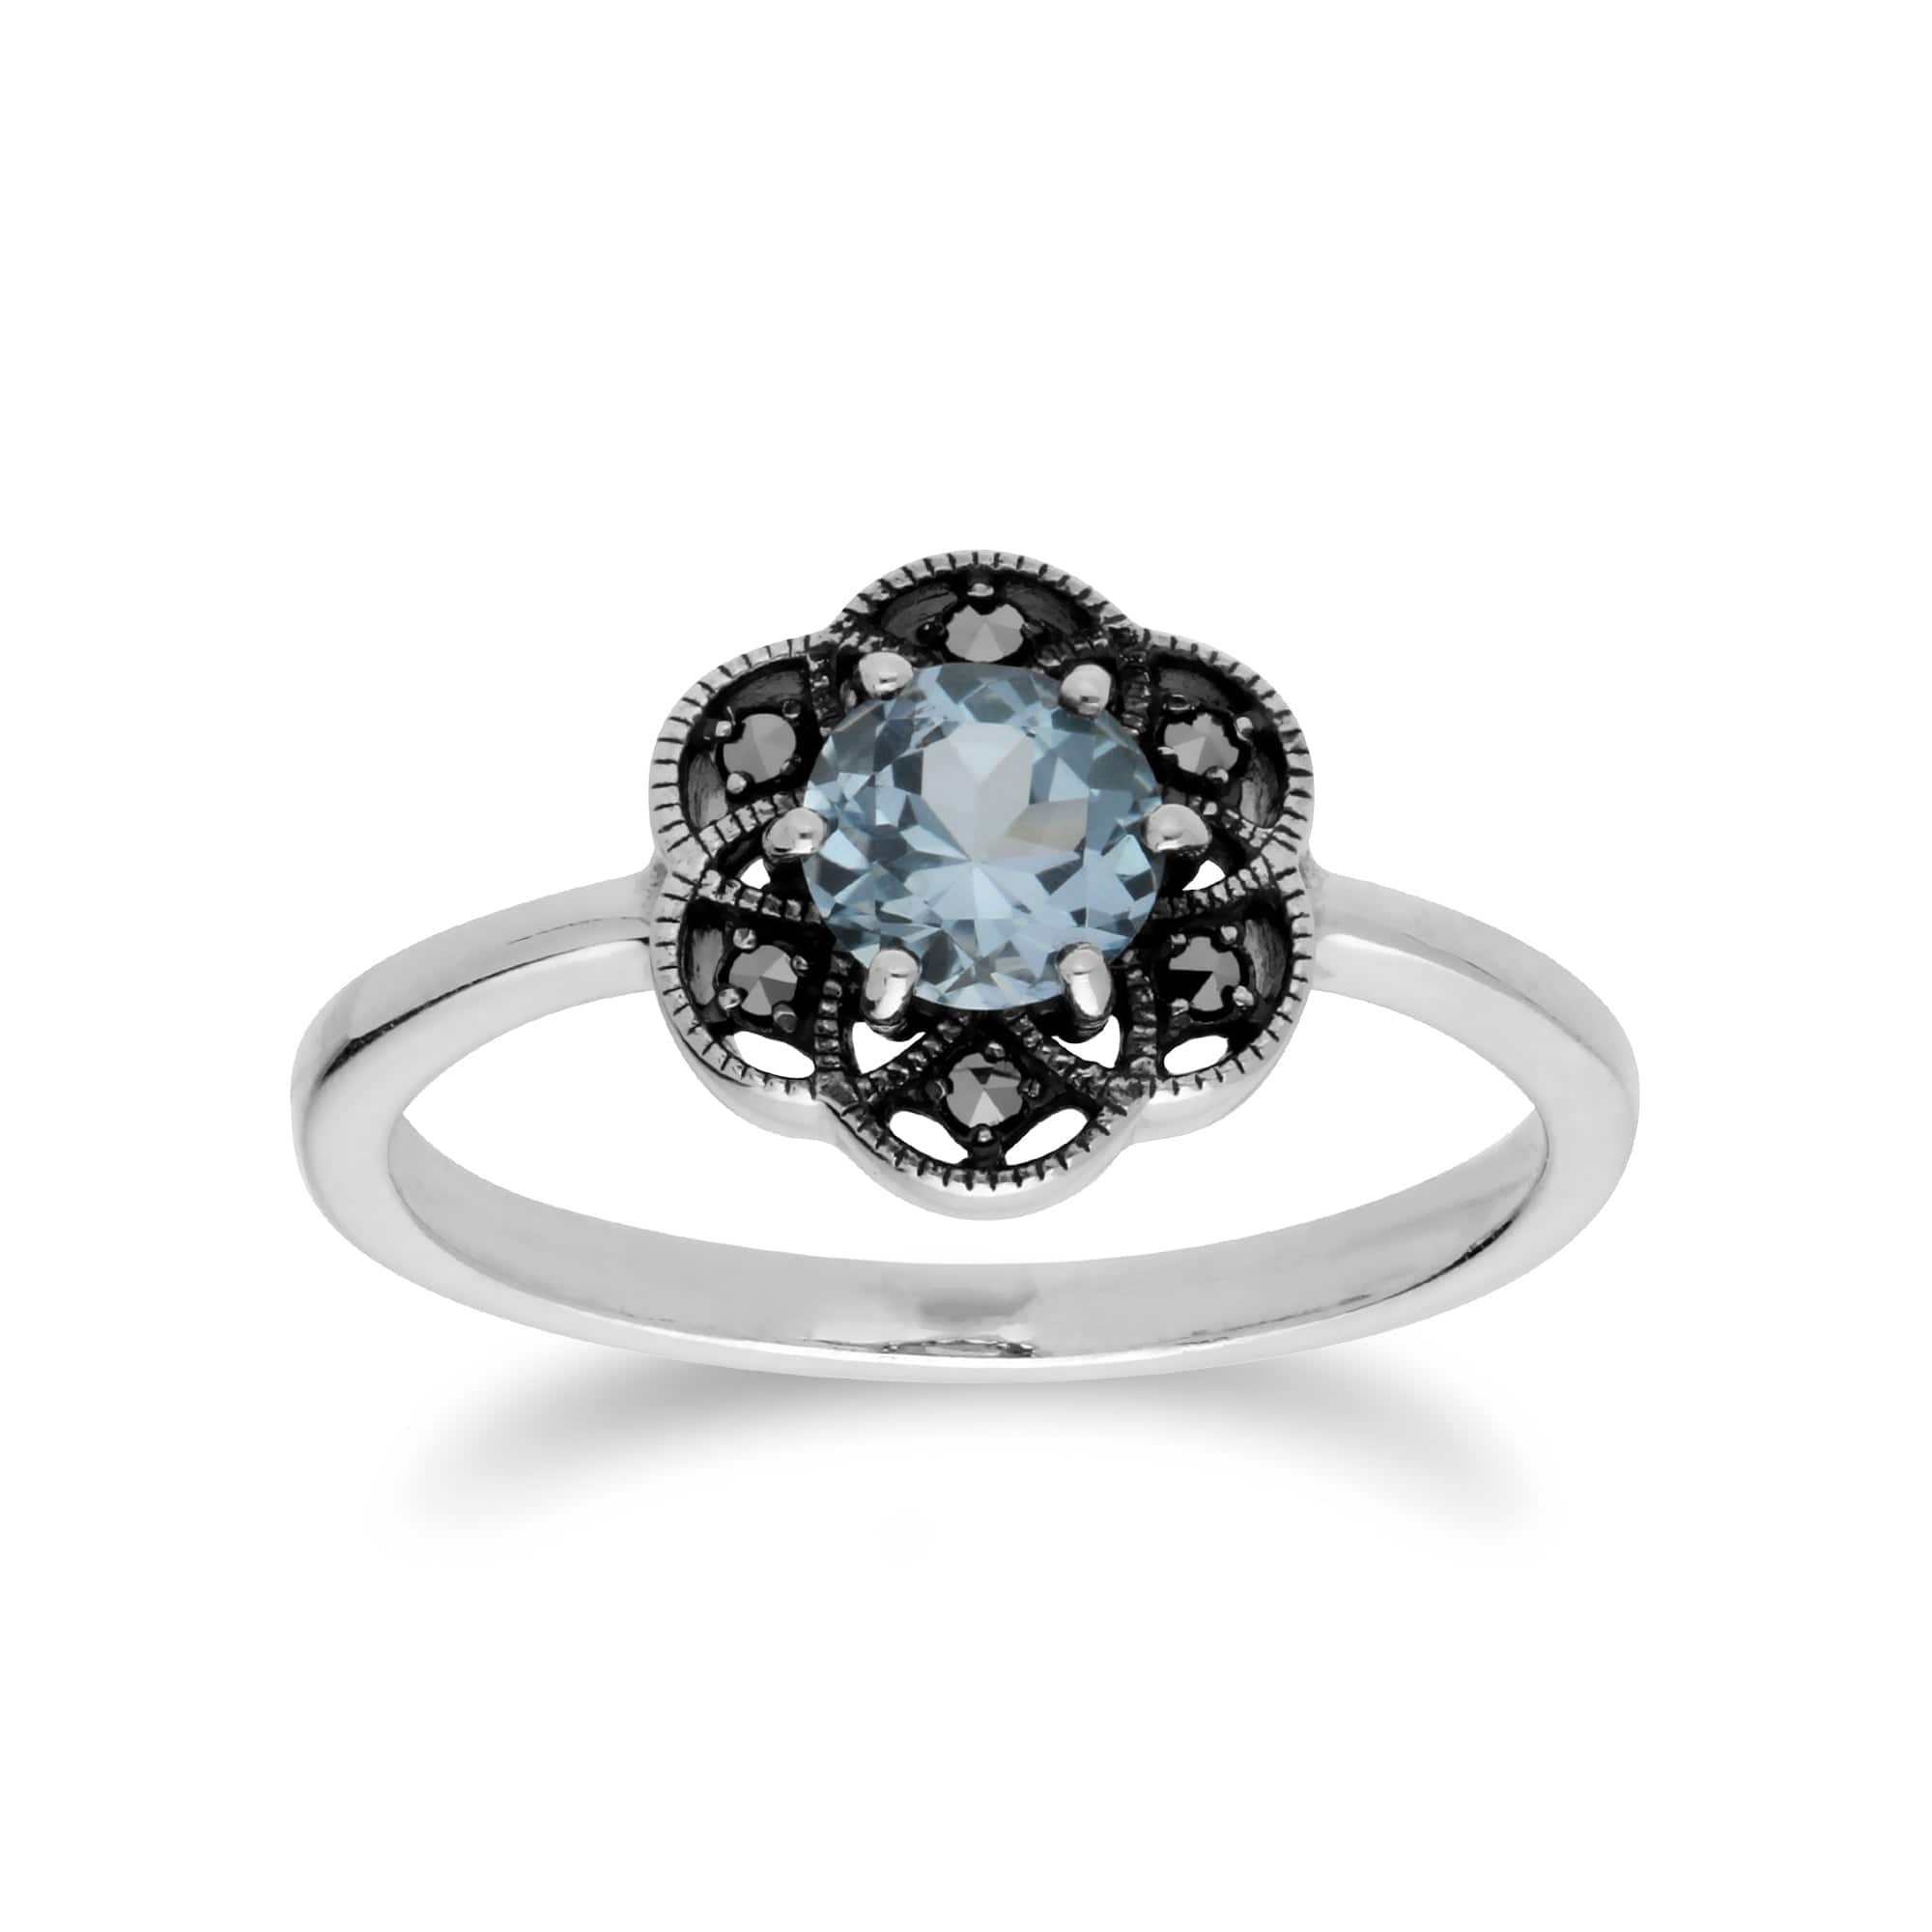 214R599401925 Floral Round Blue Topaz & Marcasite Daisy Ring in 925 Sterling Silver 1